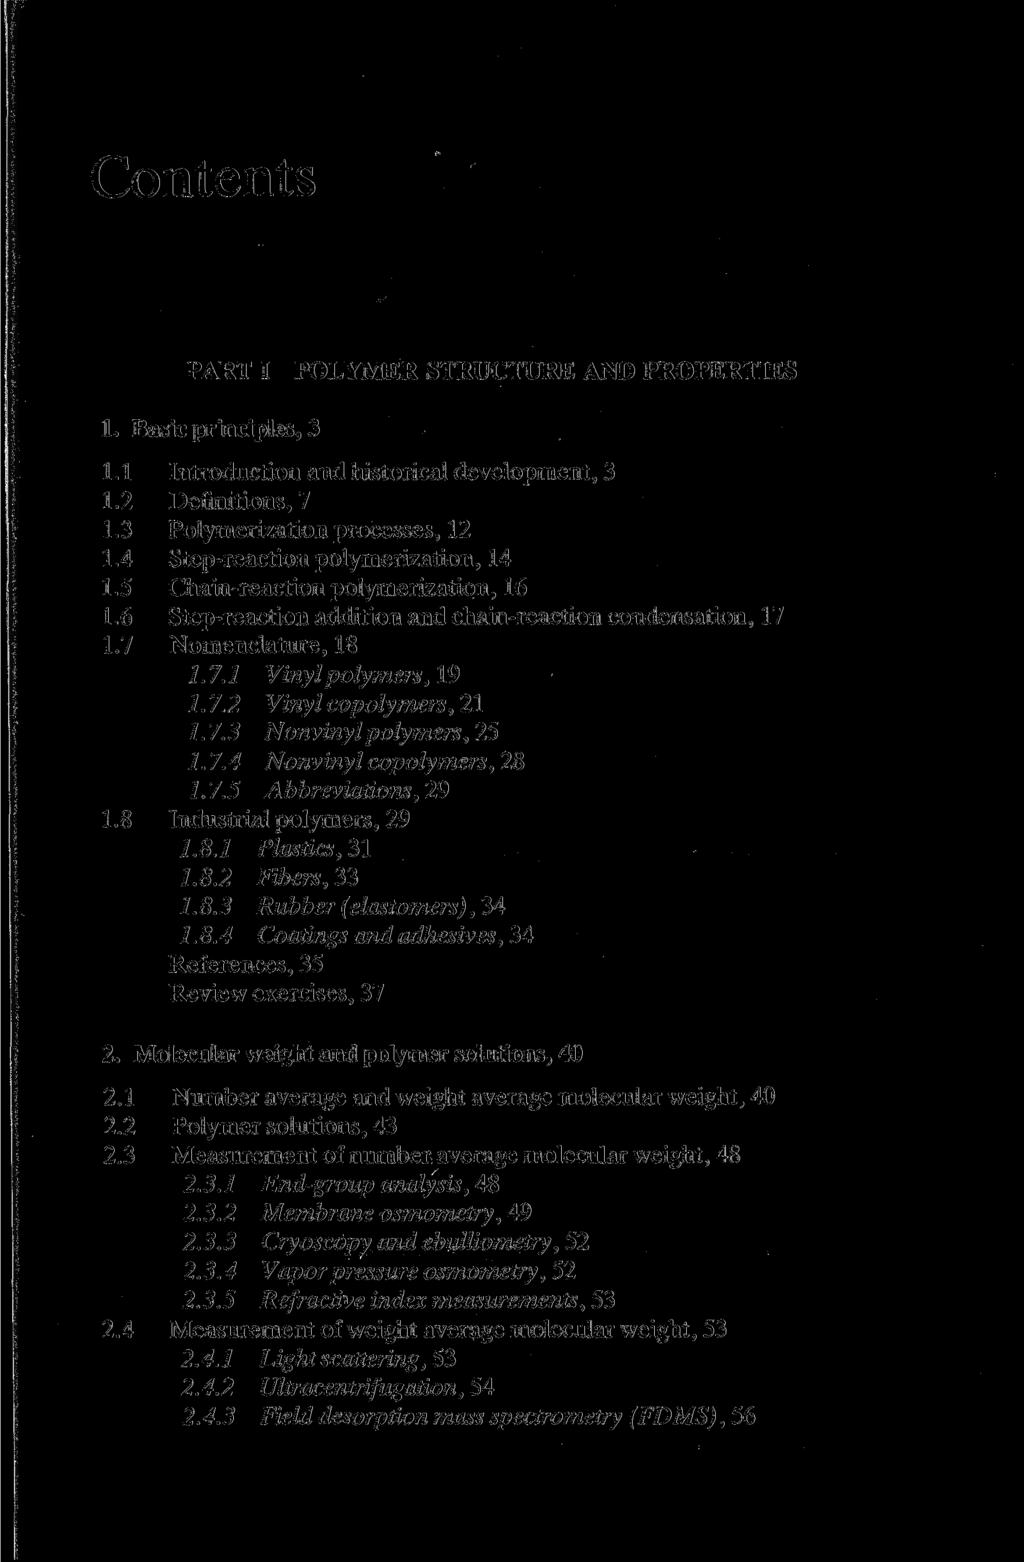 Contents PART I POLYMER STRUCTURE AND PROPERTIES 1. Basic principles, 3 1.1 Introduction and historical development, 3 1.2 Defmitions, 7 1.3 Polymerization processes, 12 1.